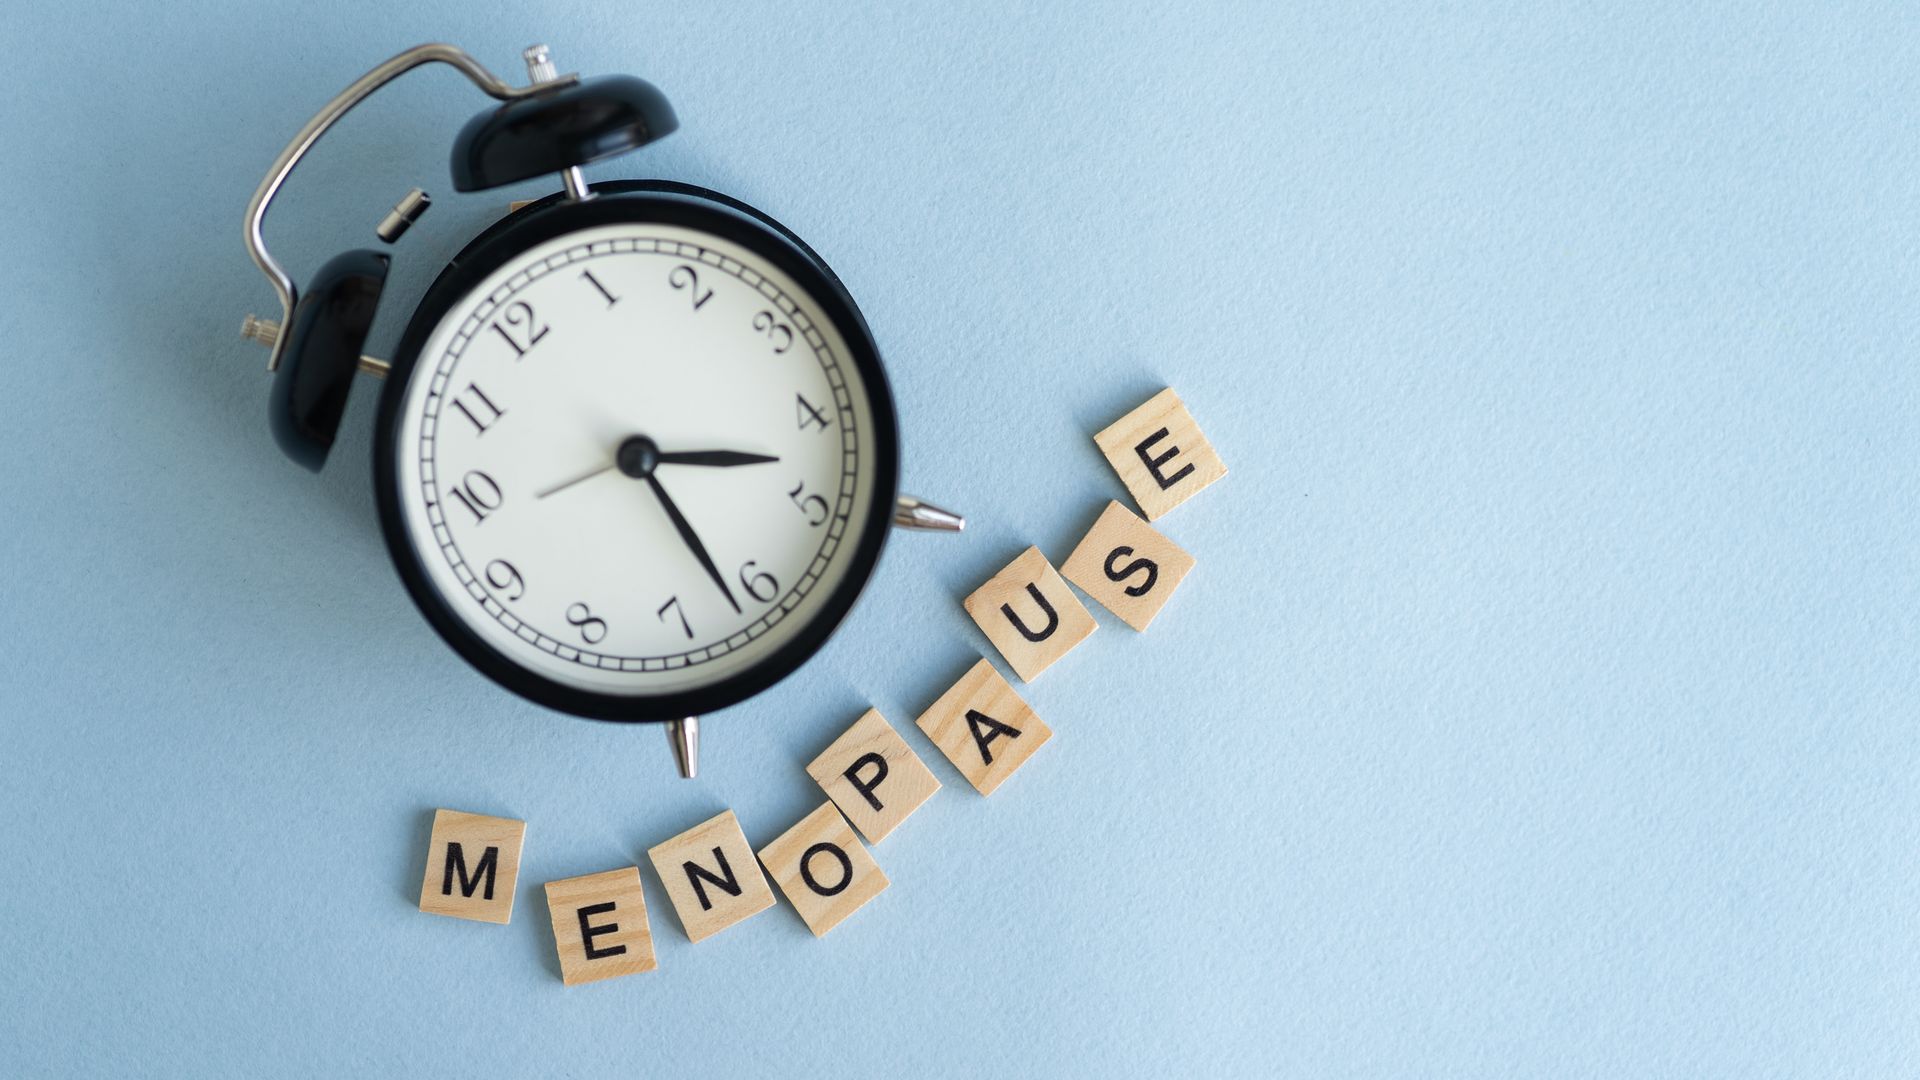 Research has shown you can delay menopause